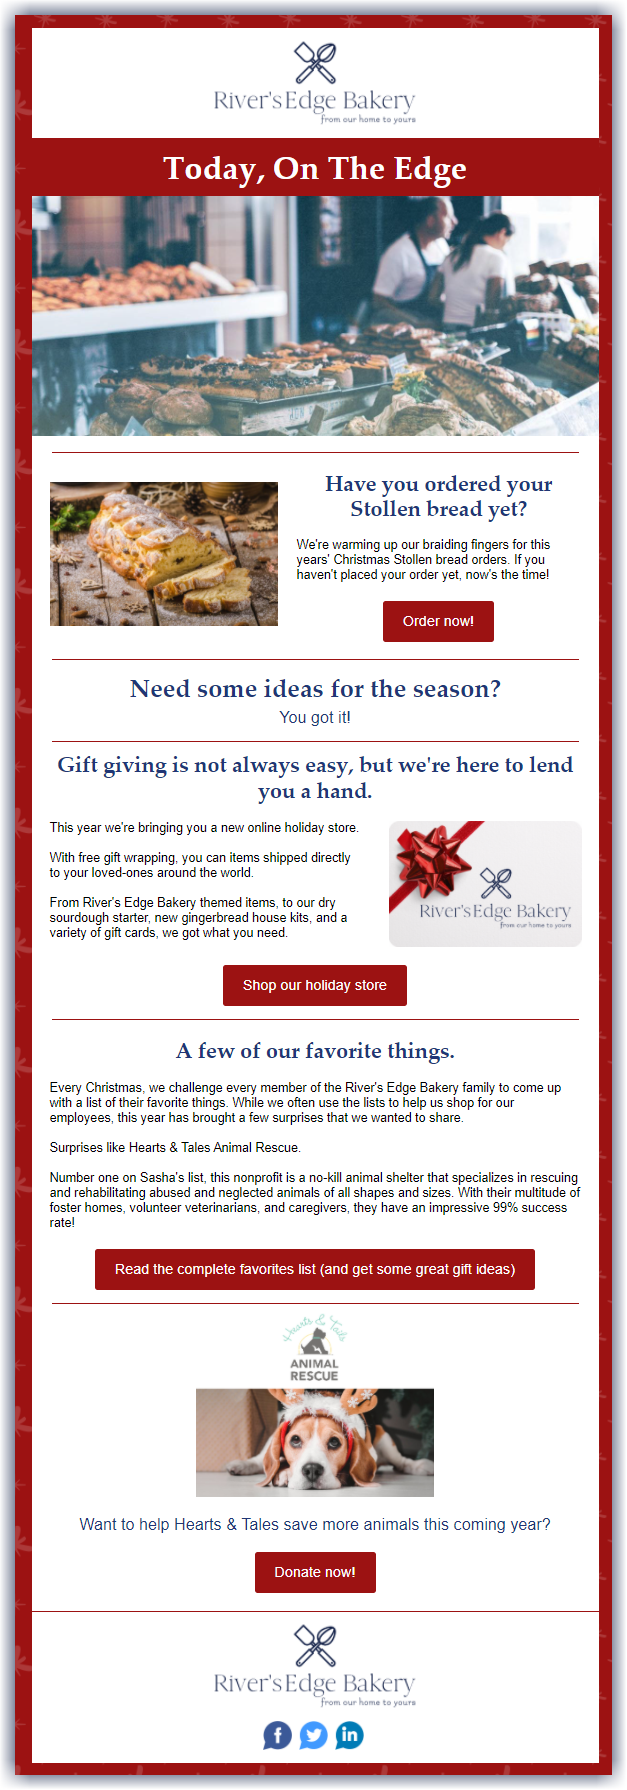 Example of how to decorate an email template for Christmas time by adding red and holiday images